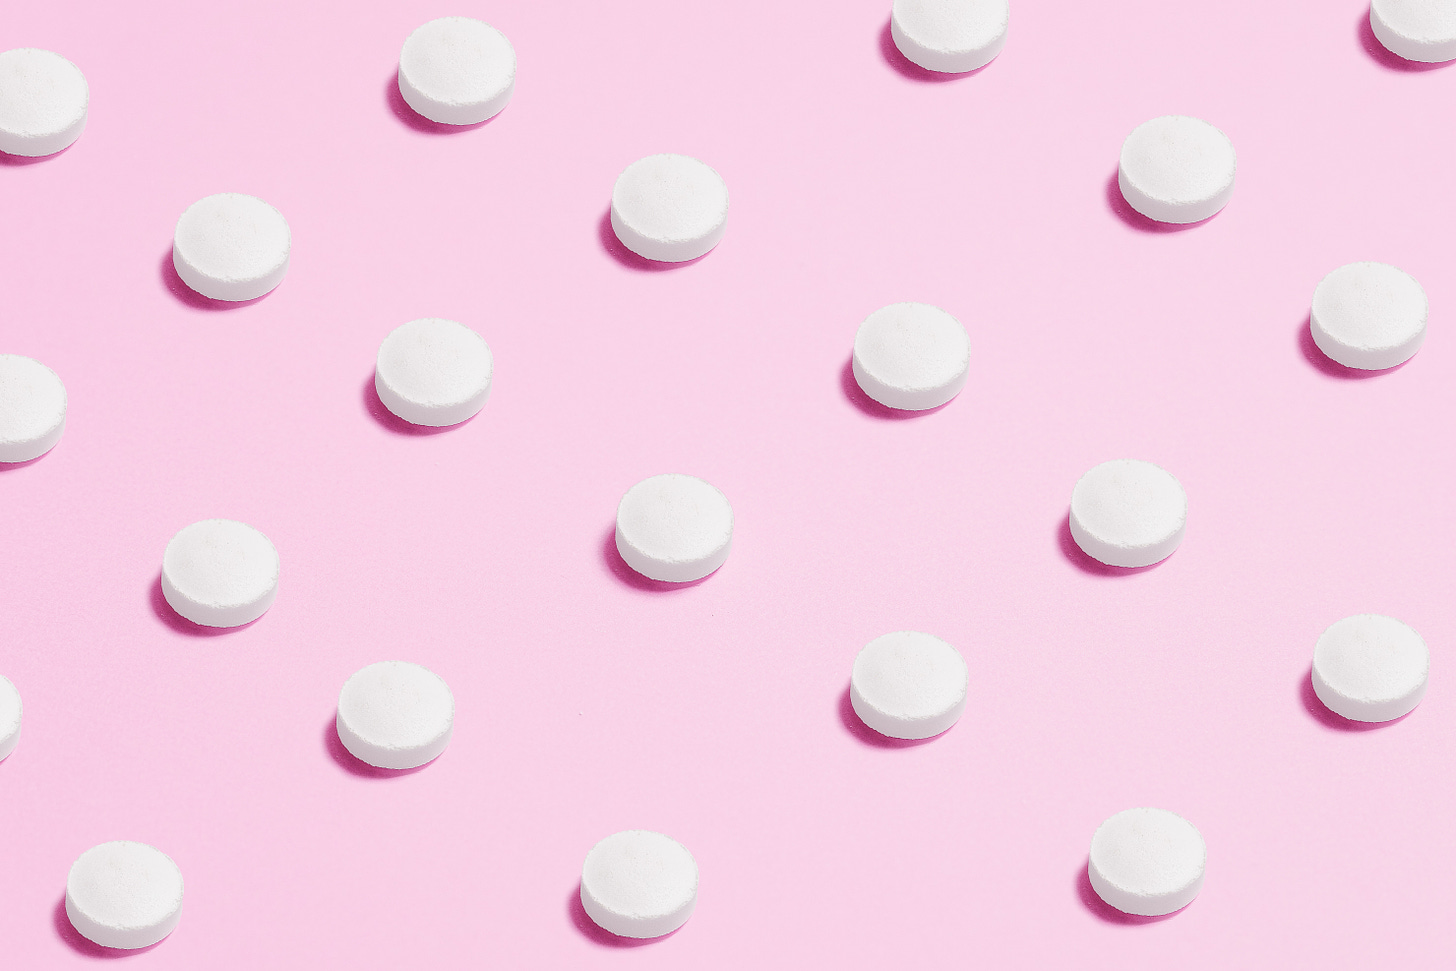 Equally distant pills on a pink background